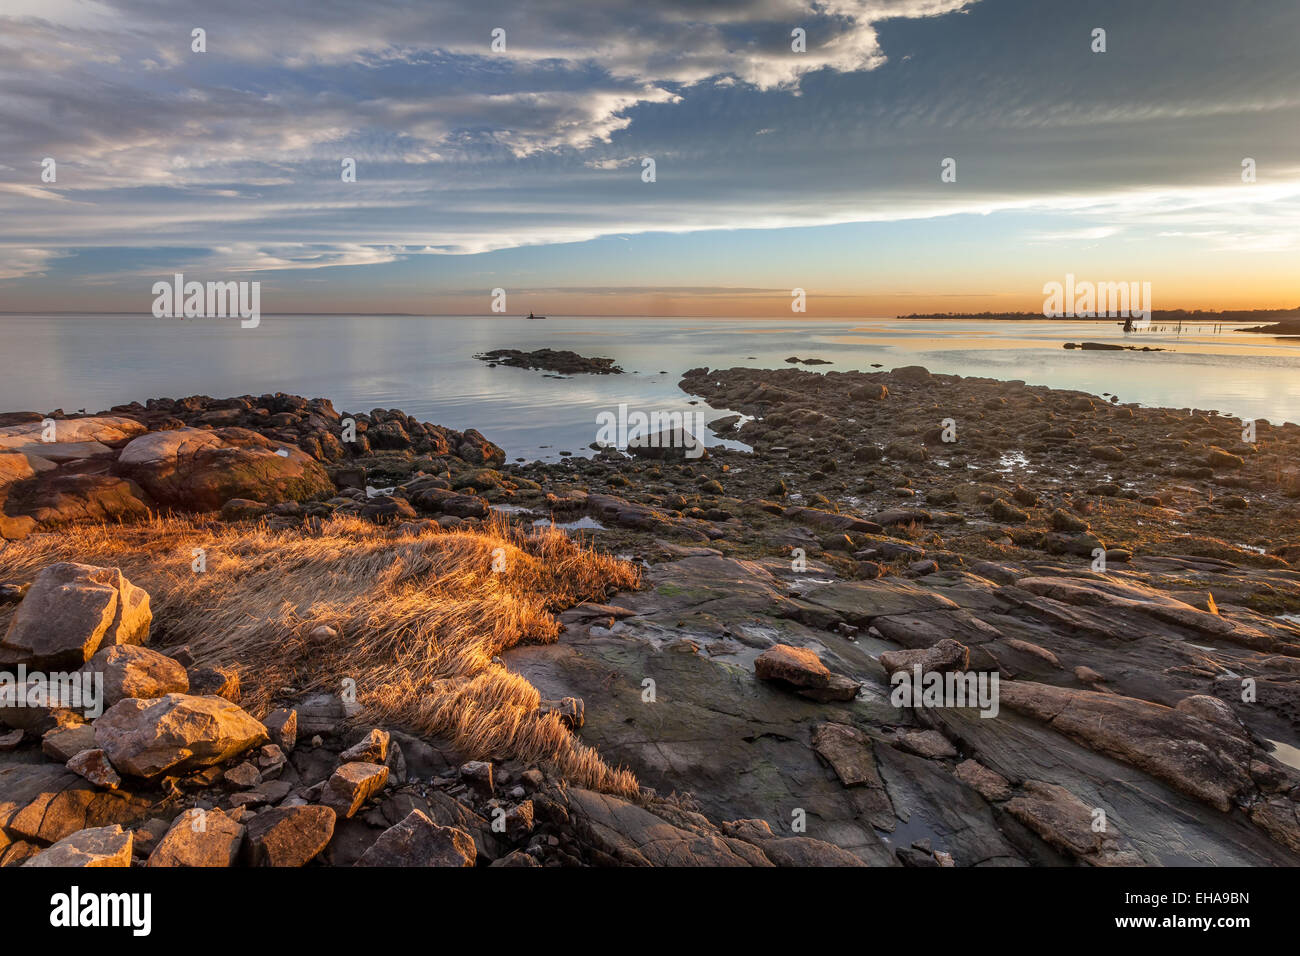 A rocky and grassy beach at sunset with a partially blue sky and NYC off in the far distance. Stock Photo